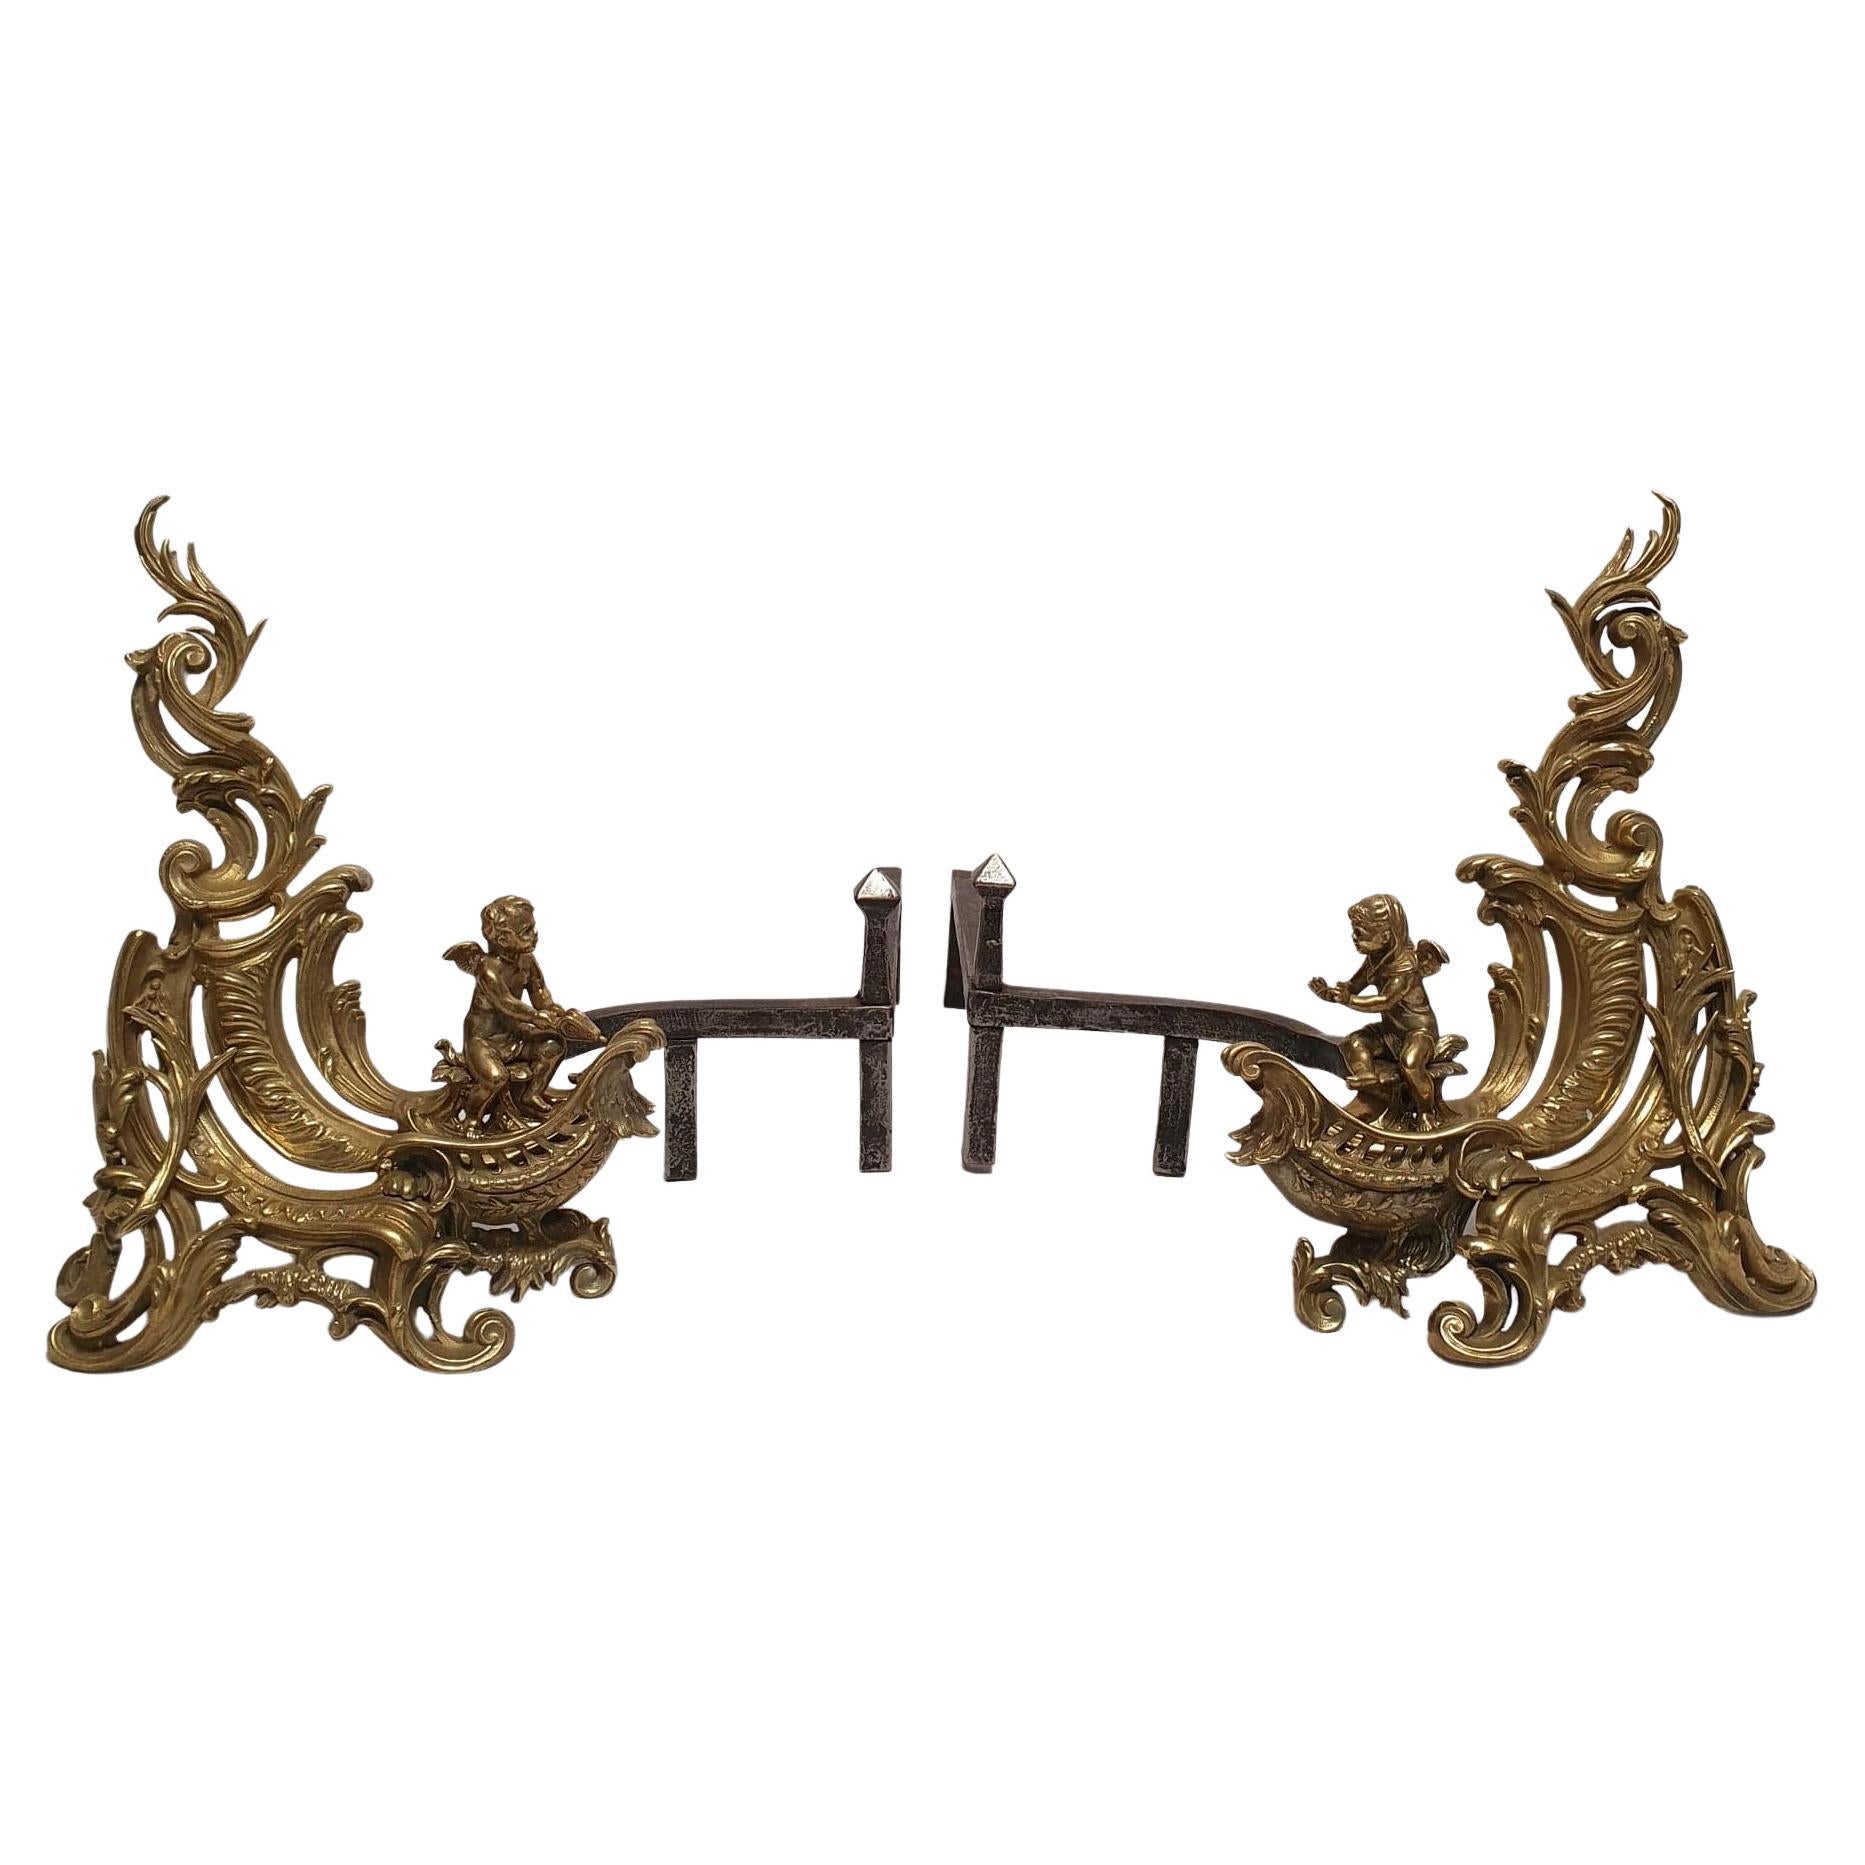 Pair of Andirons Louis XV Style with Putti, Chiseled Bronze, 19th